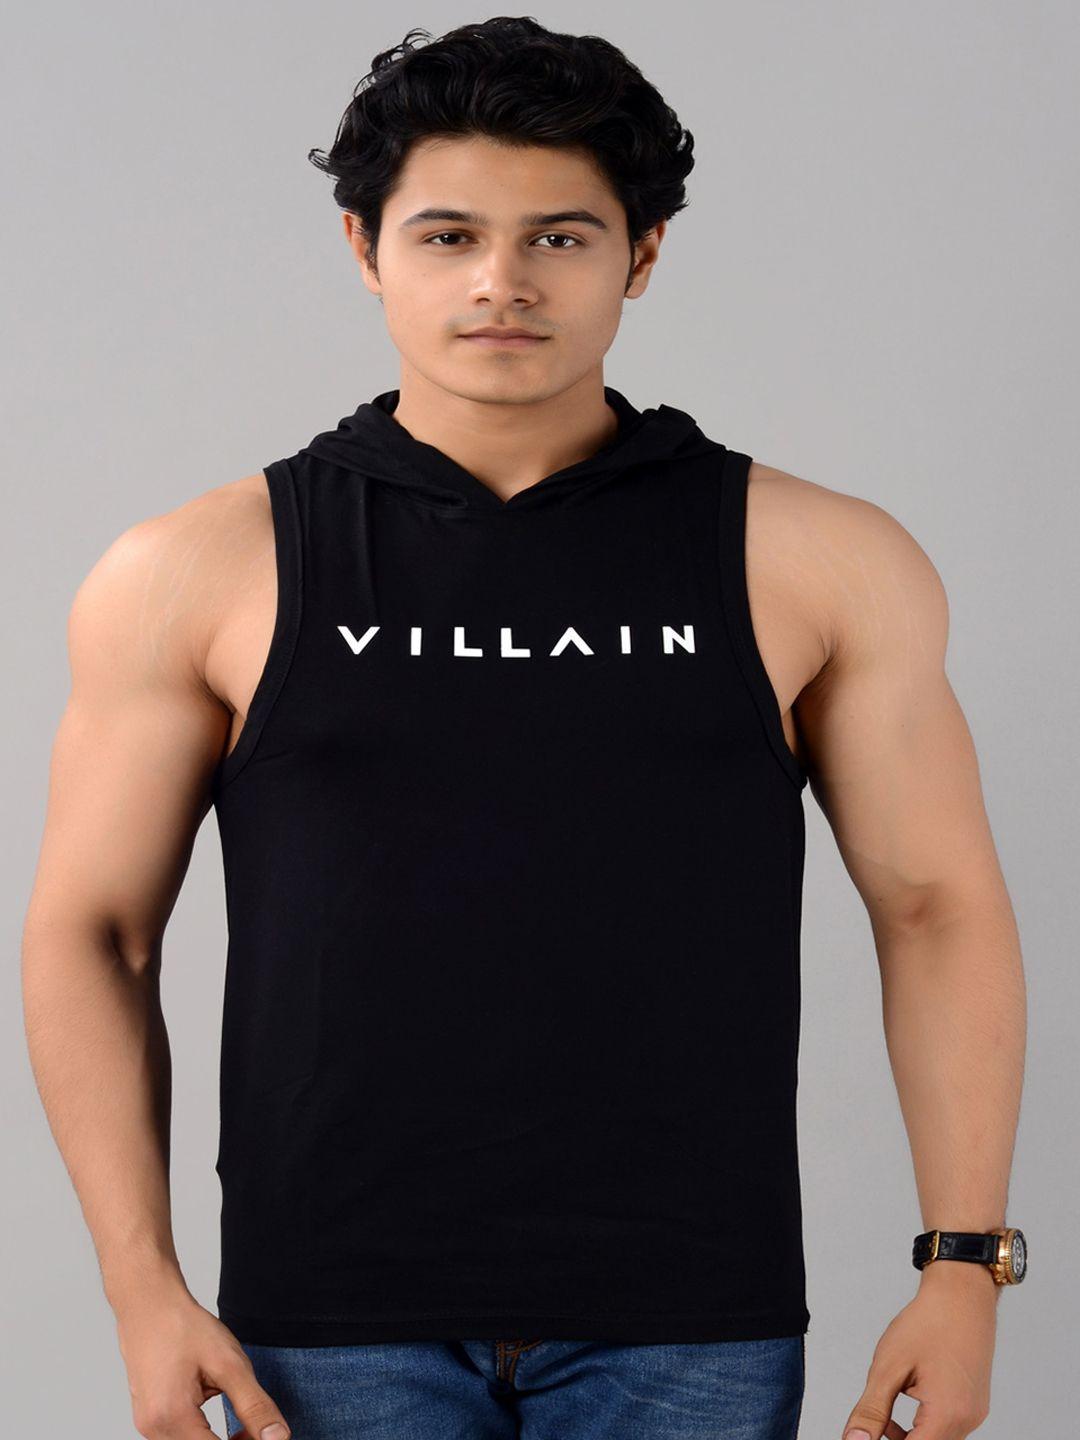 villain typography printed hooded gym vest